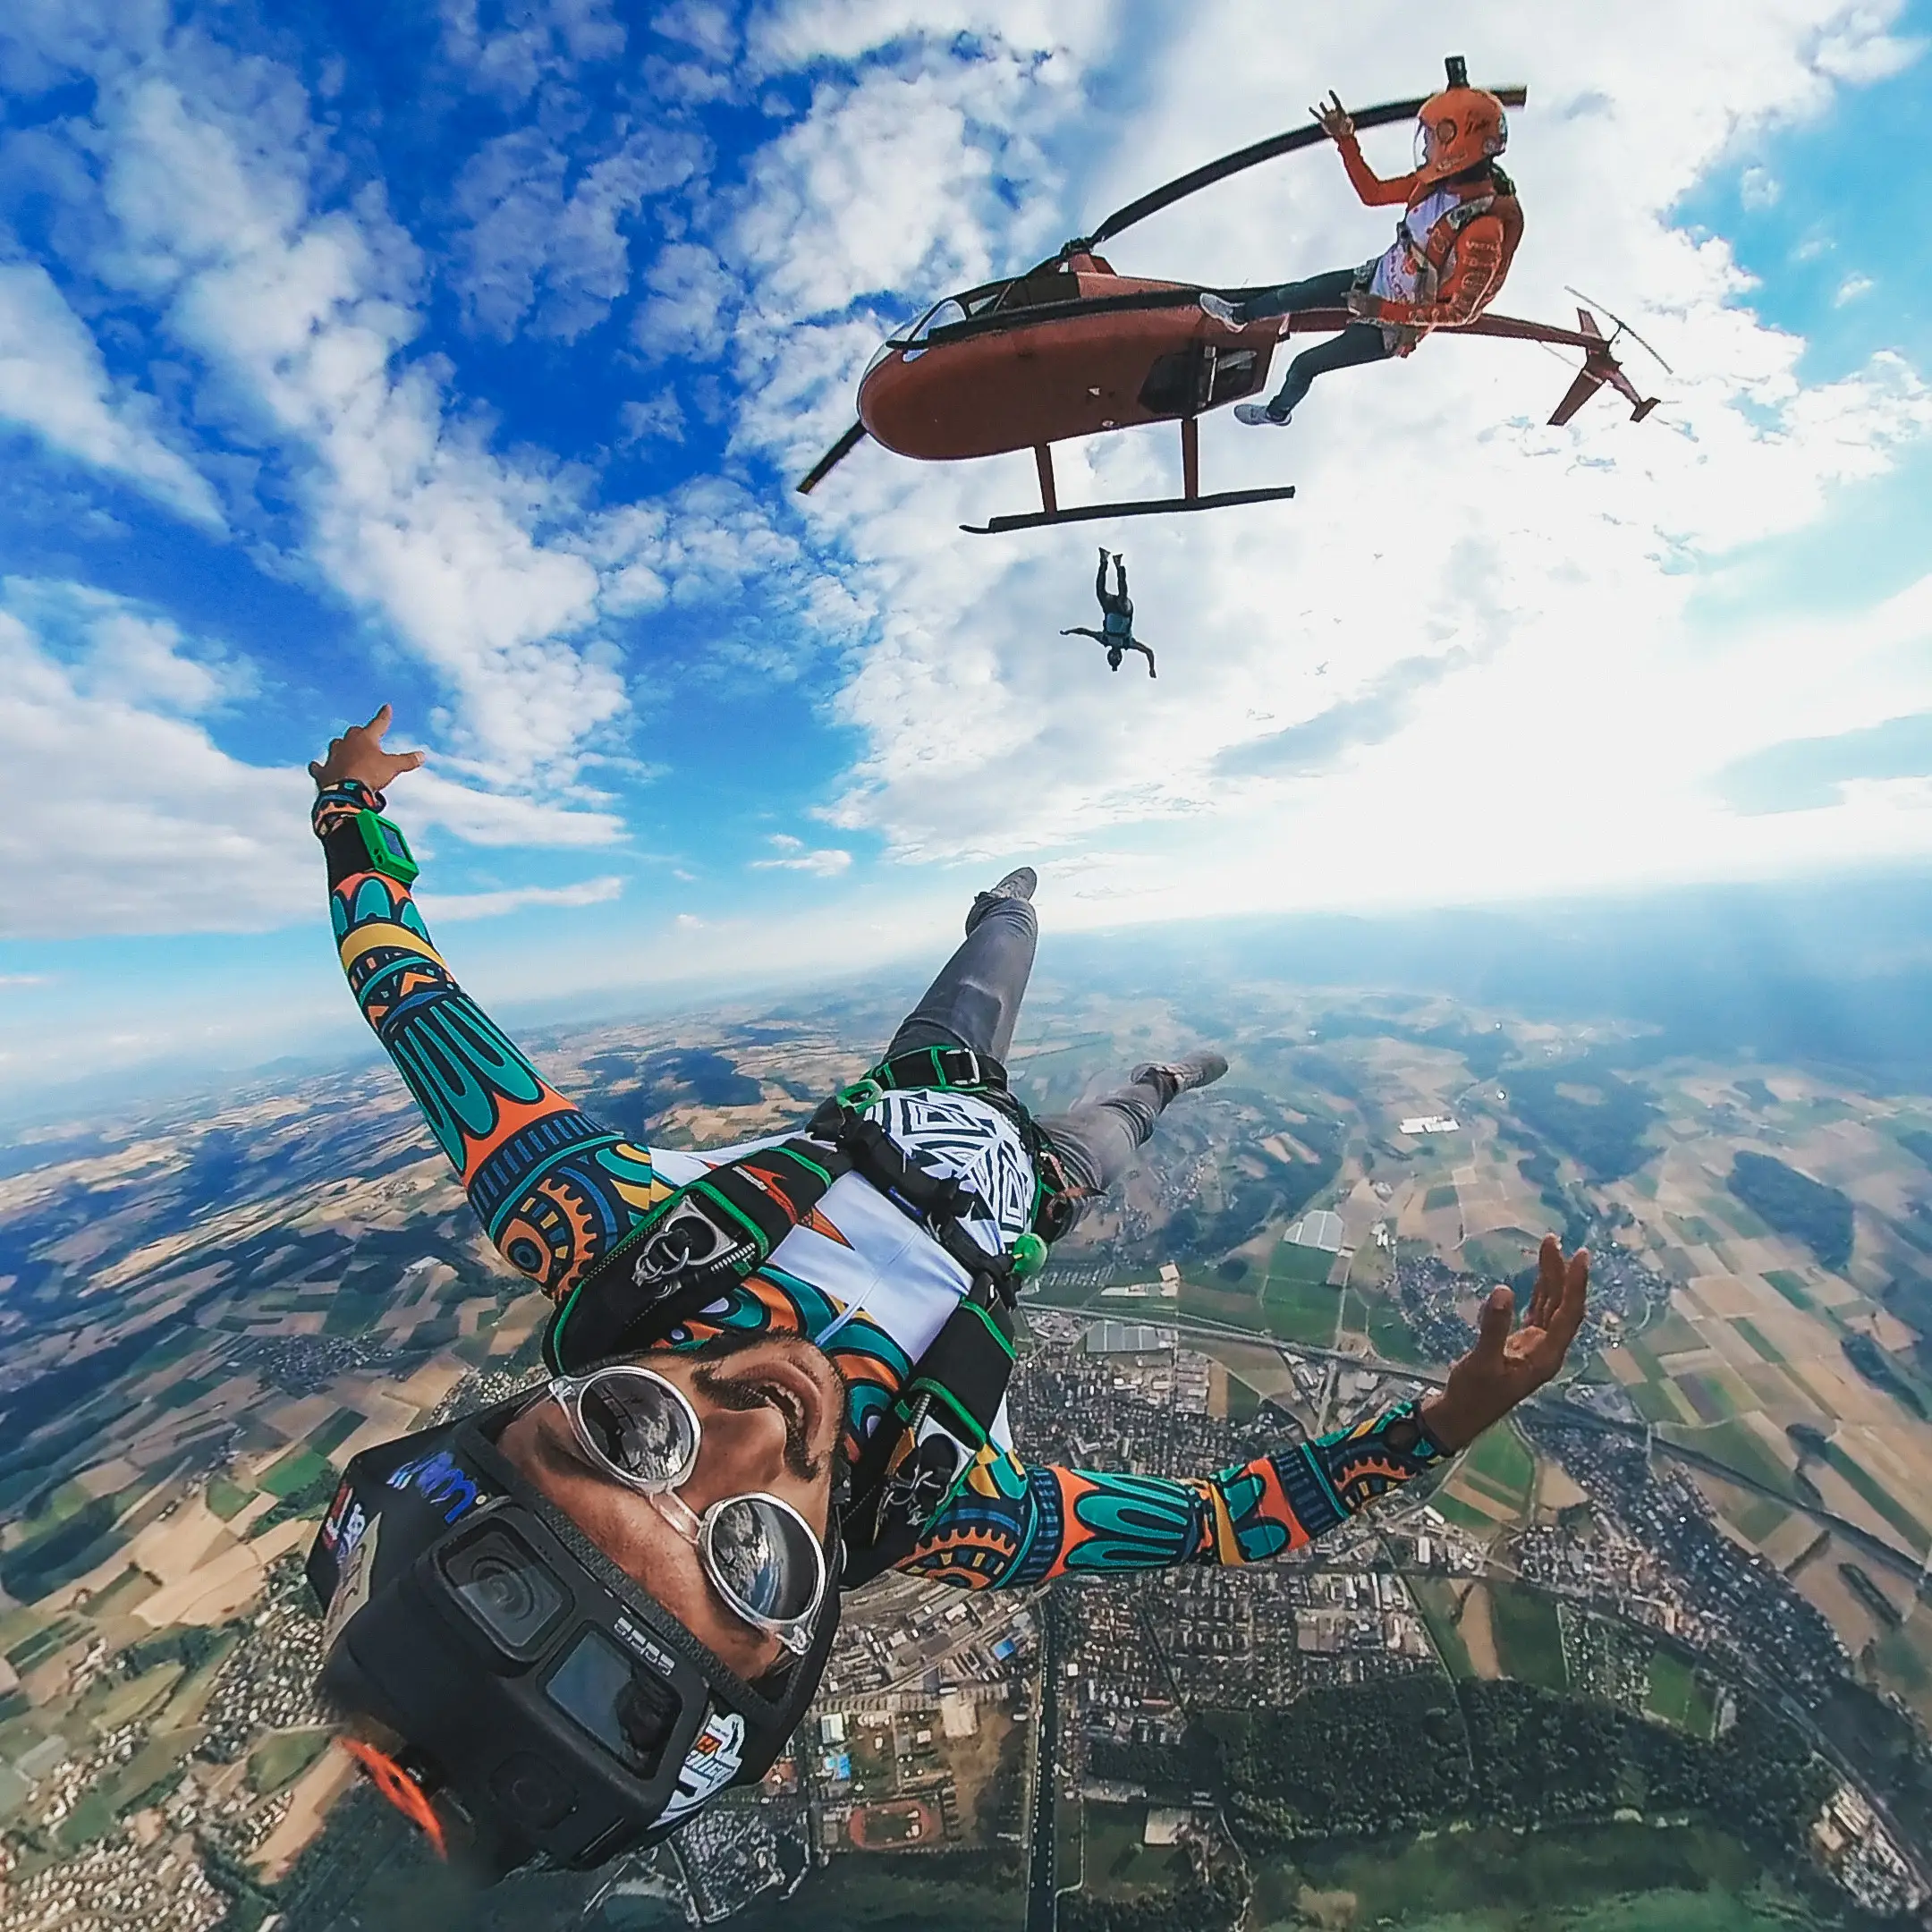 Tryfly skydiving